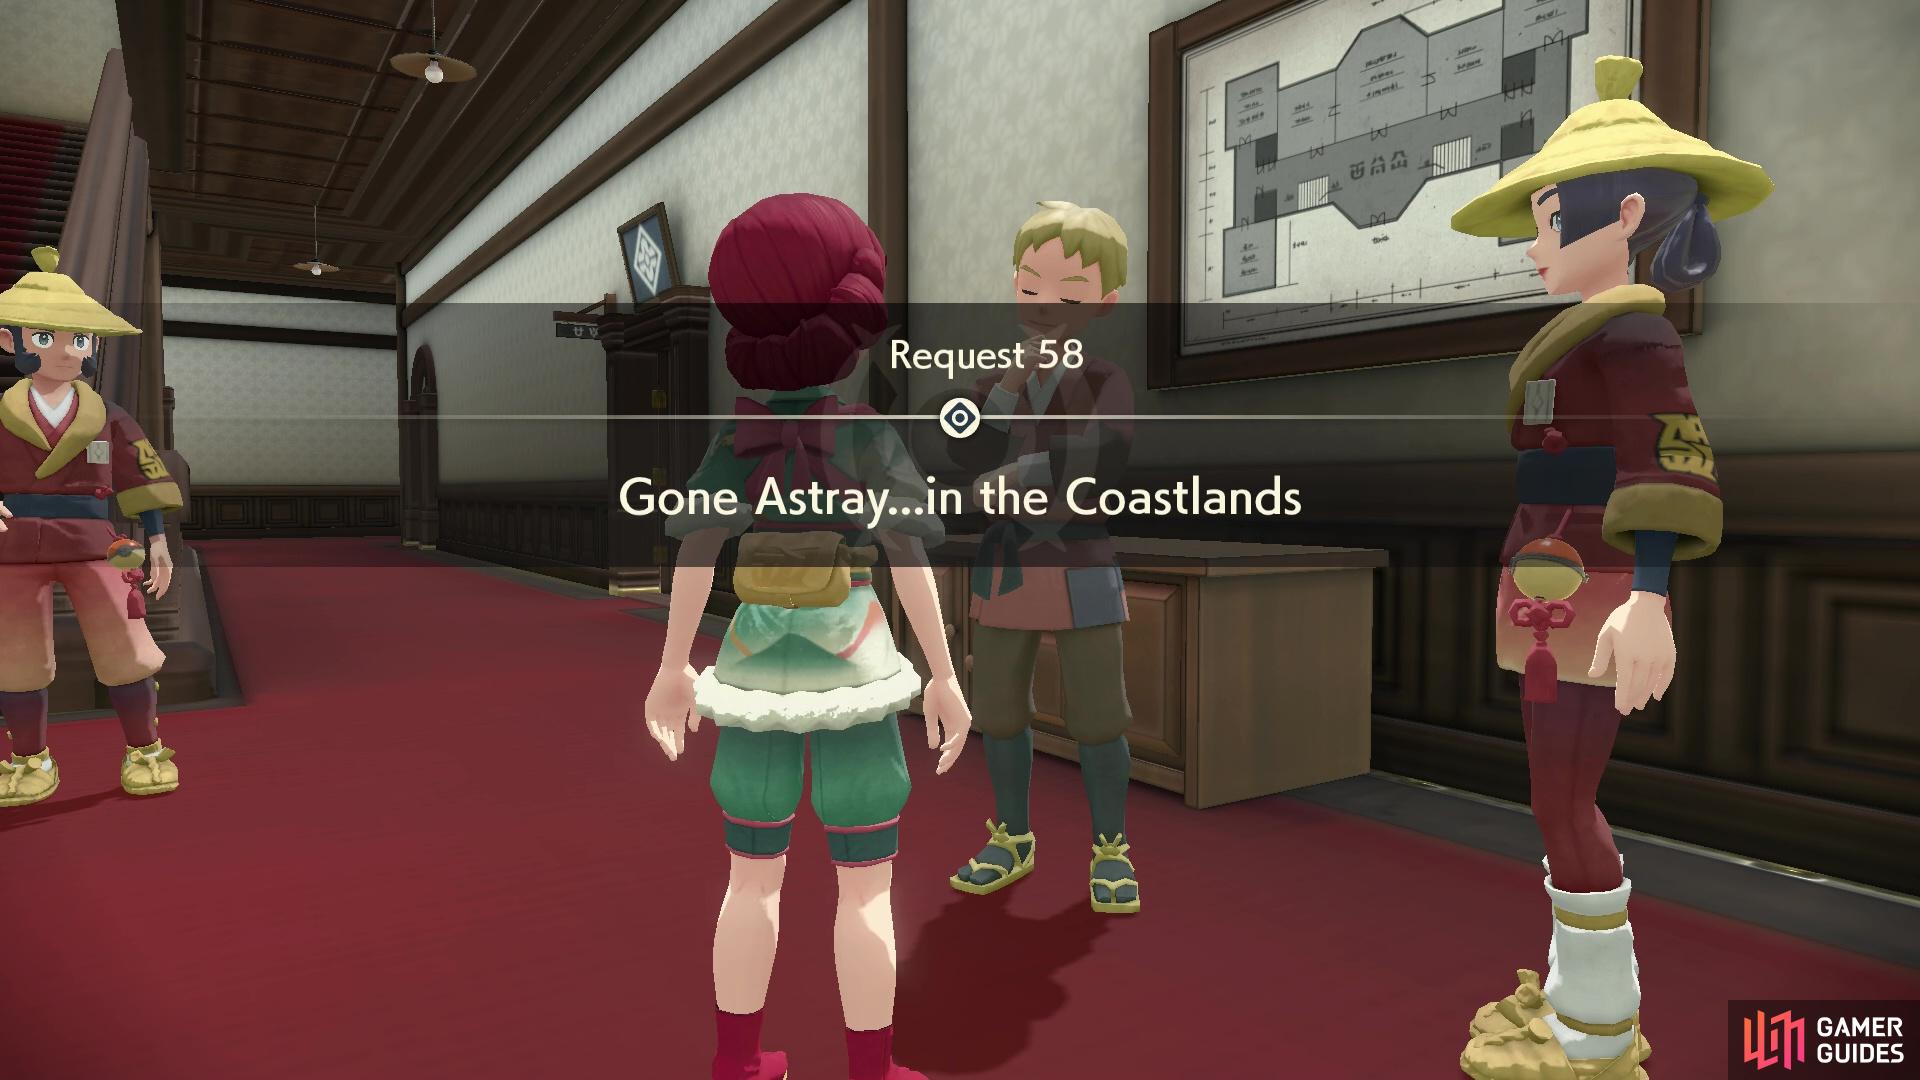 Request 58: Gone Astray…in the Coastlands.